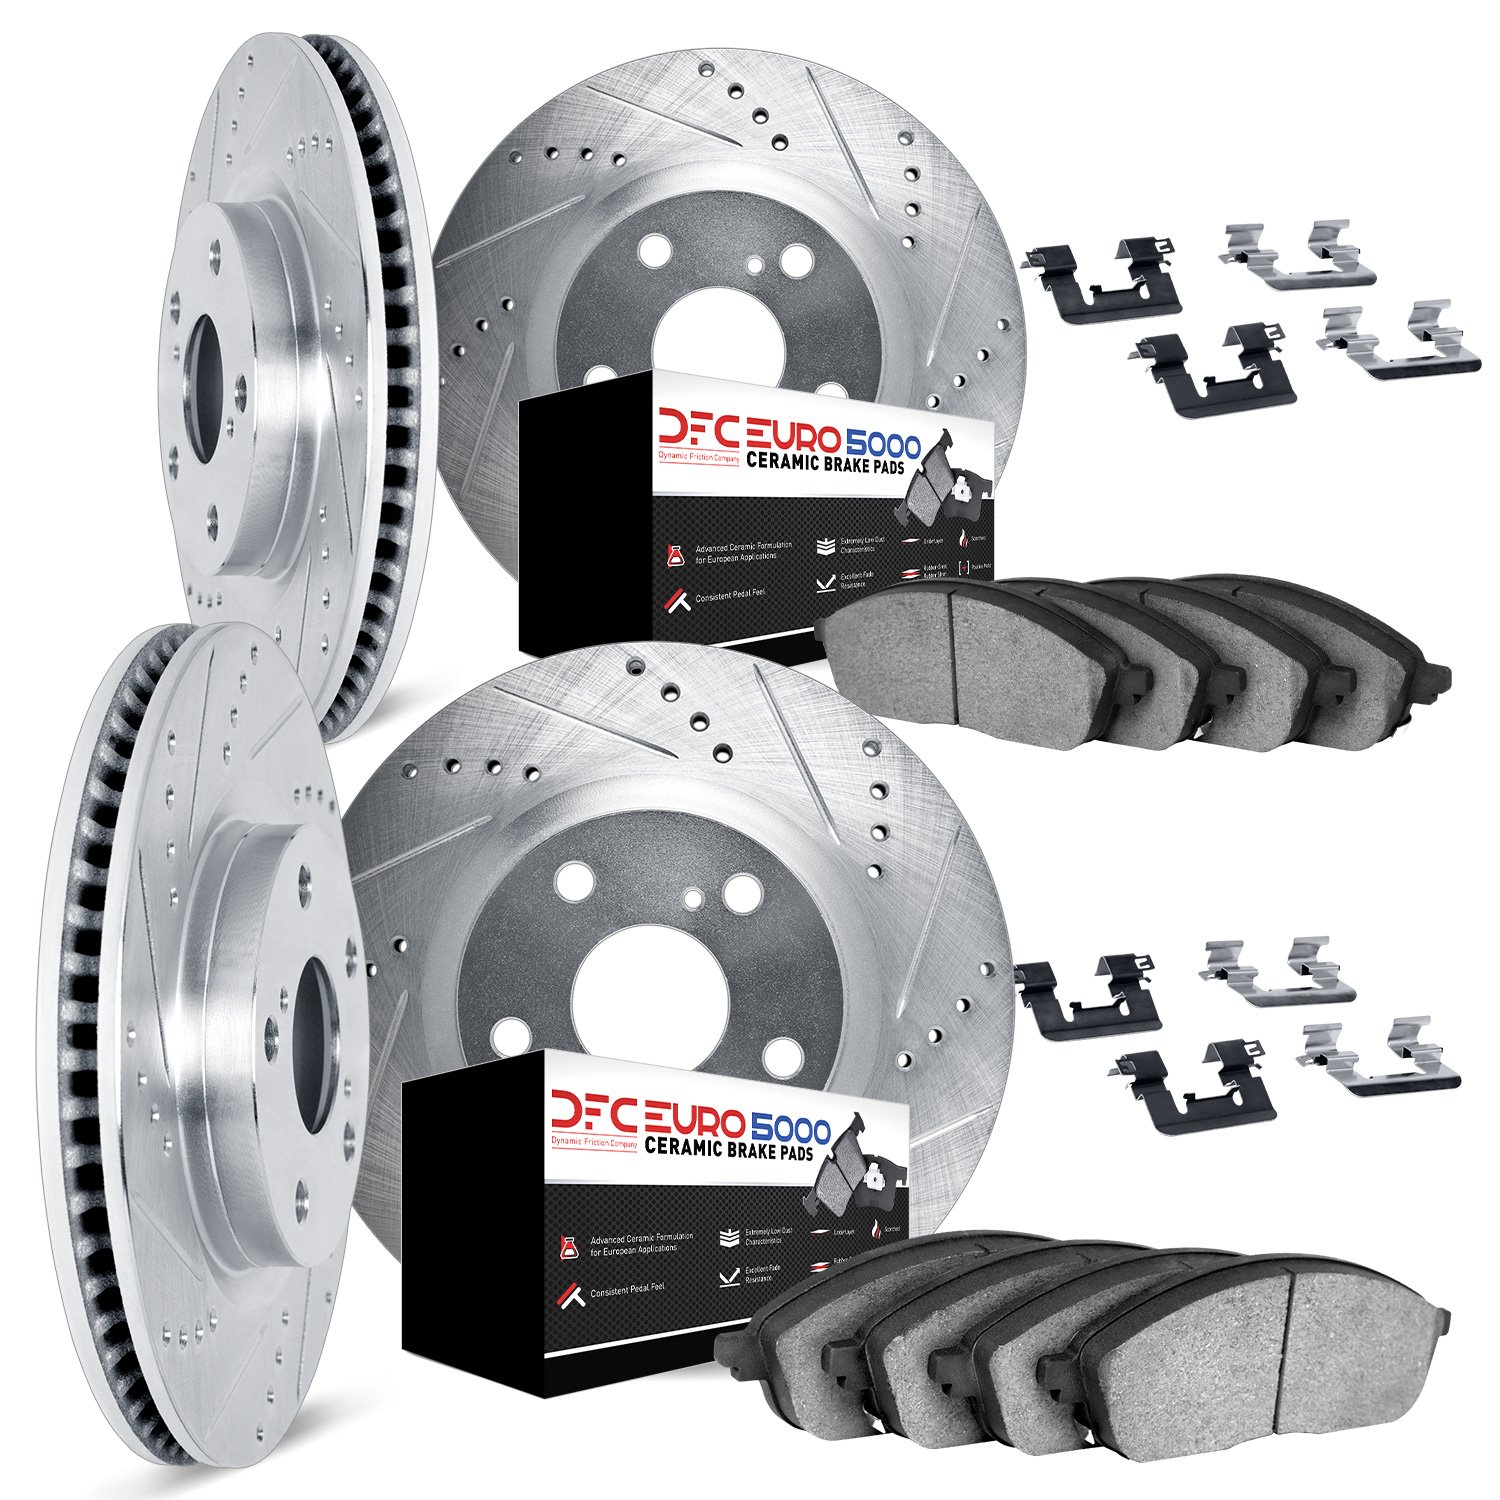 7614-31032 Drilled/Slotted Brake Rotors w/5000 Euro Ceramic Brake Pads Kit & Hardware [Silver], Fits Select BMW, Position: Front